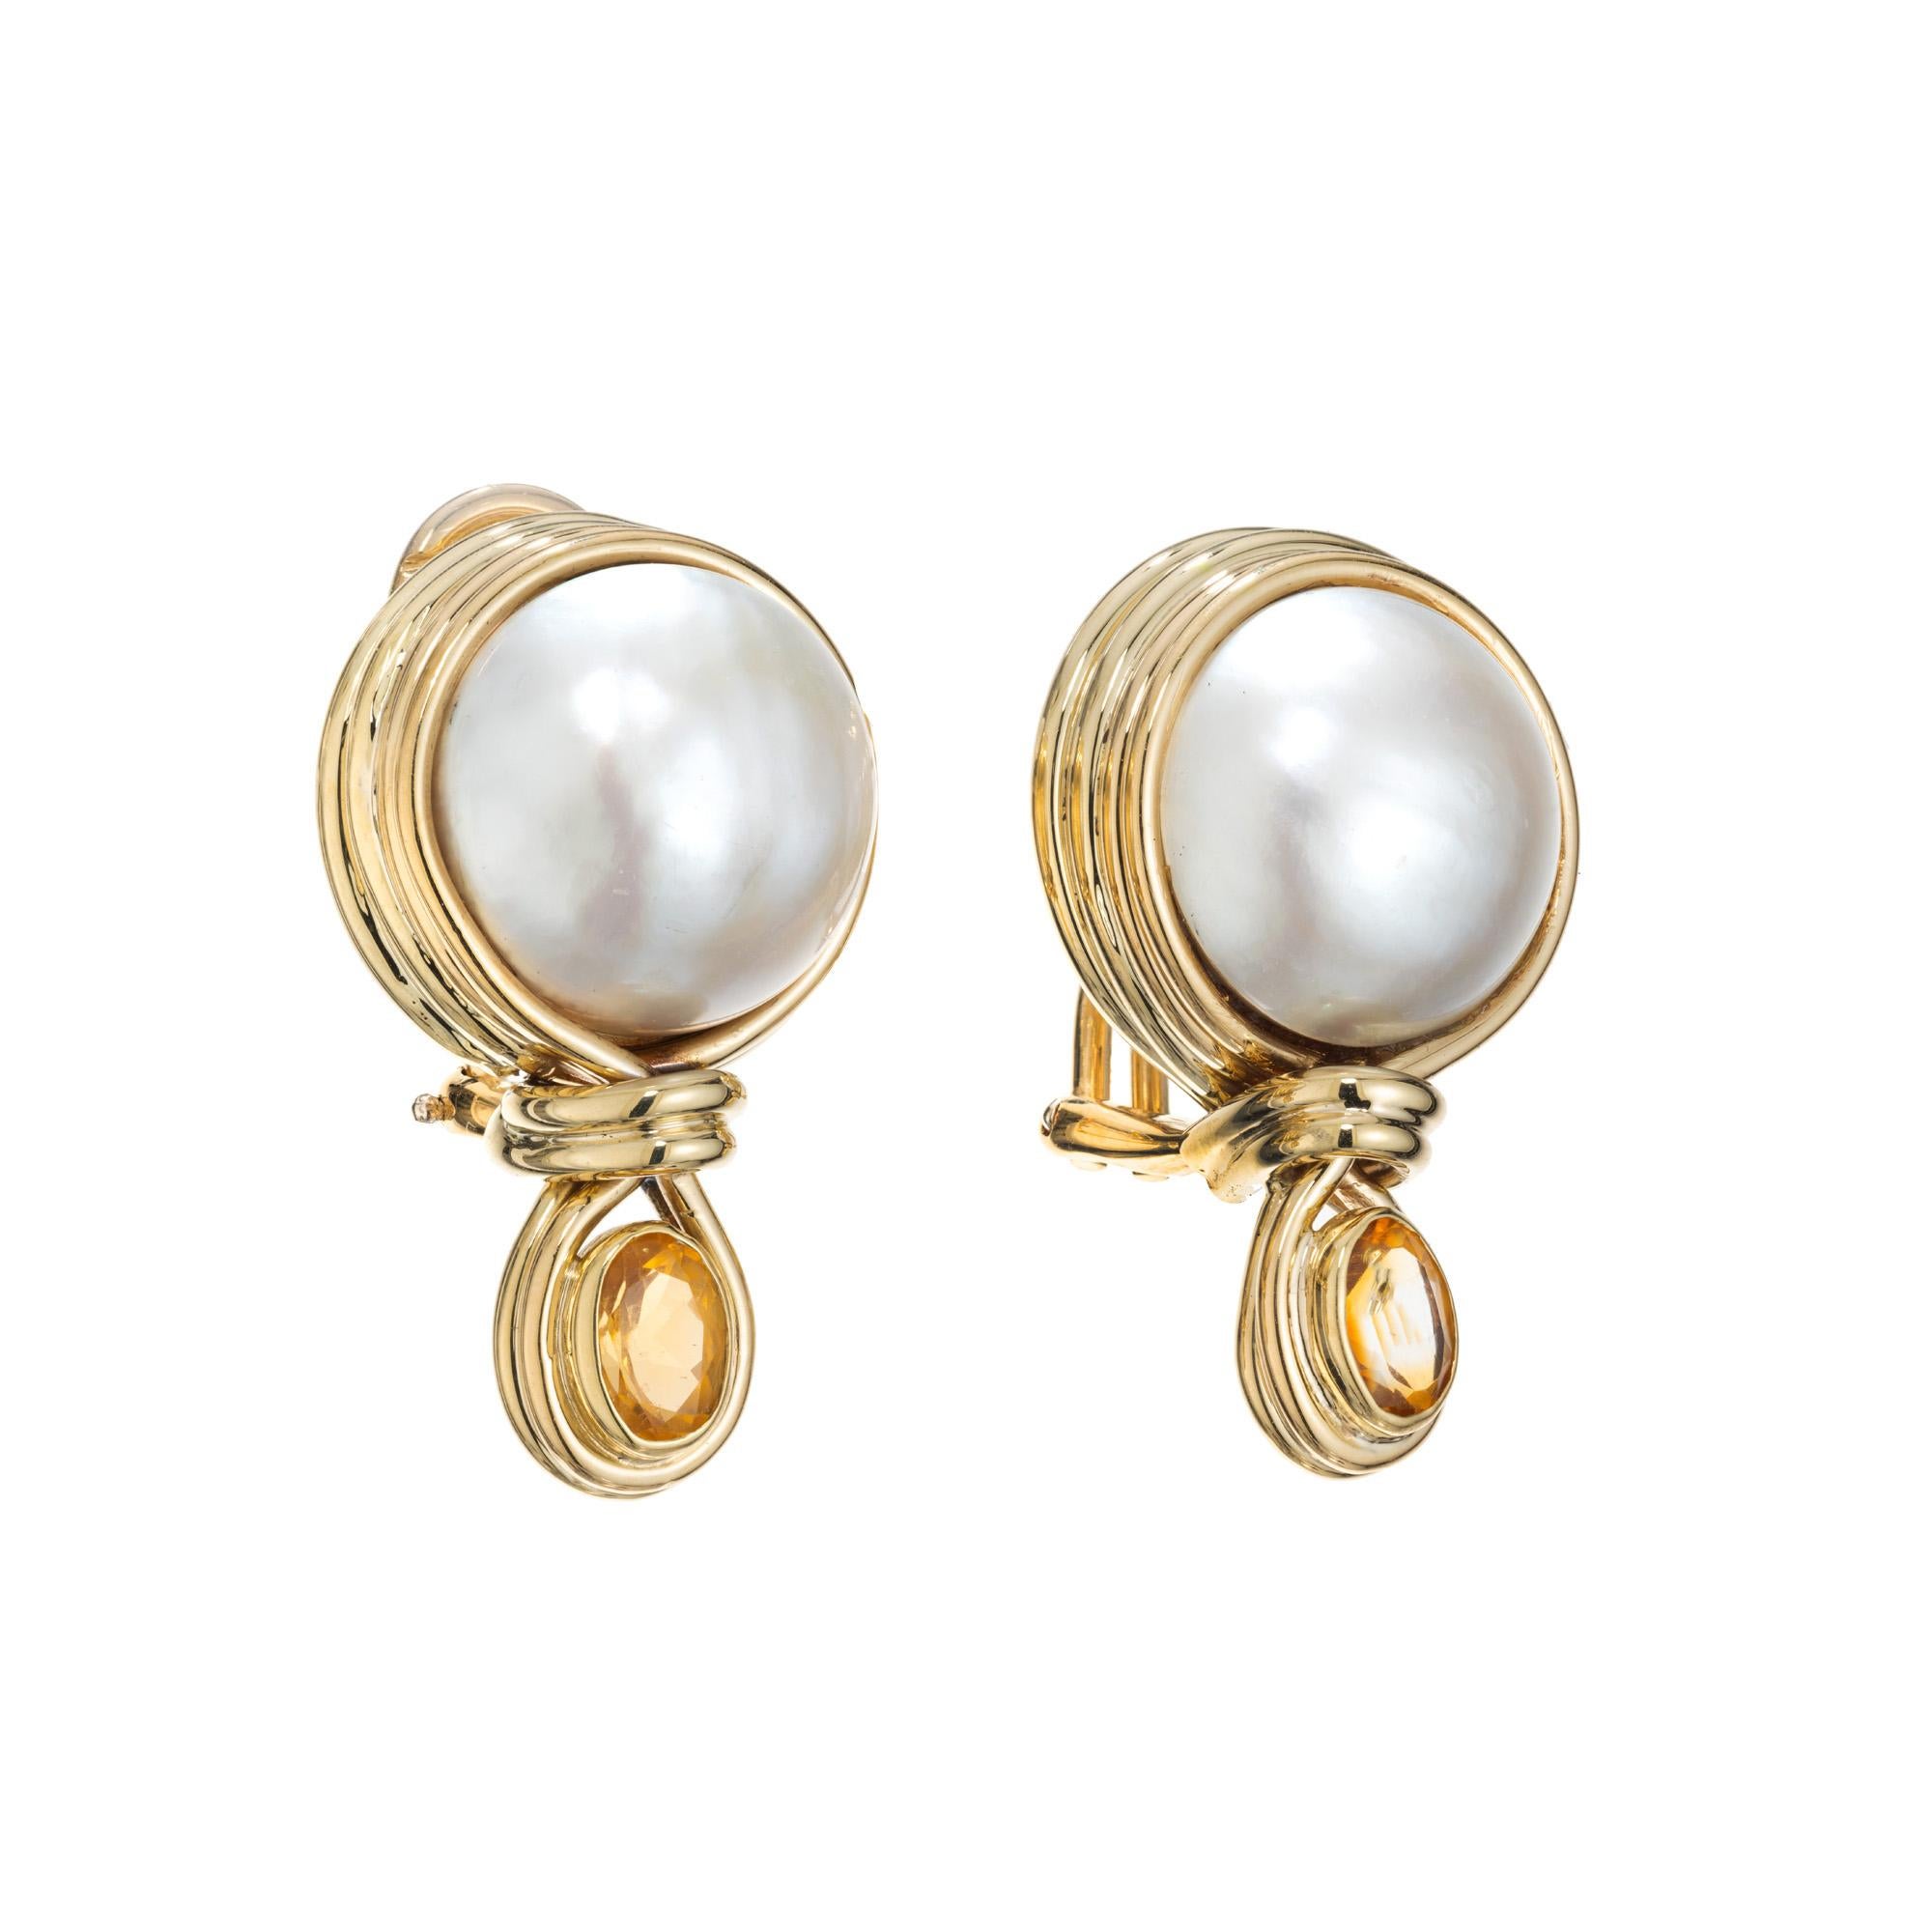 Authentic R Cipullo hand made pearl and citrine clip post earrings. 2 round cabochon white mabe pearls set in 18k yellow and wire settings. Each pearl is accented with an oval citrine. Beautifully crafted by iconic Italian jewelry designer Renato